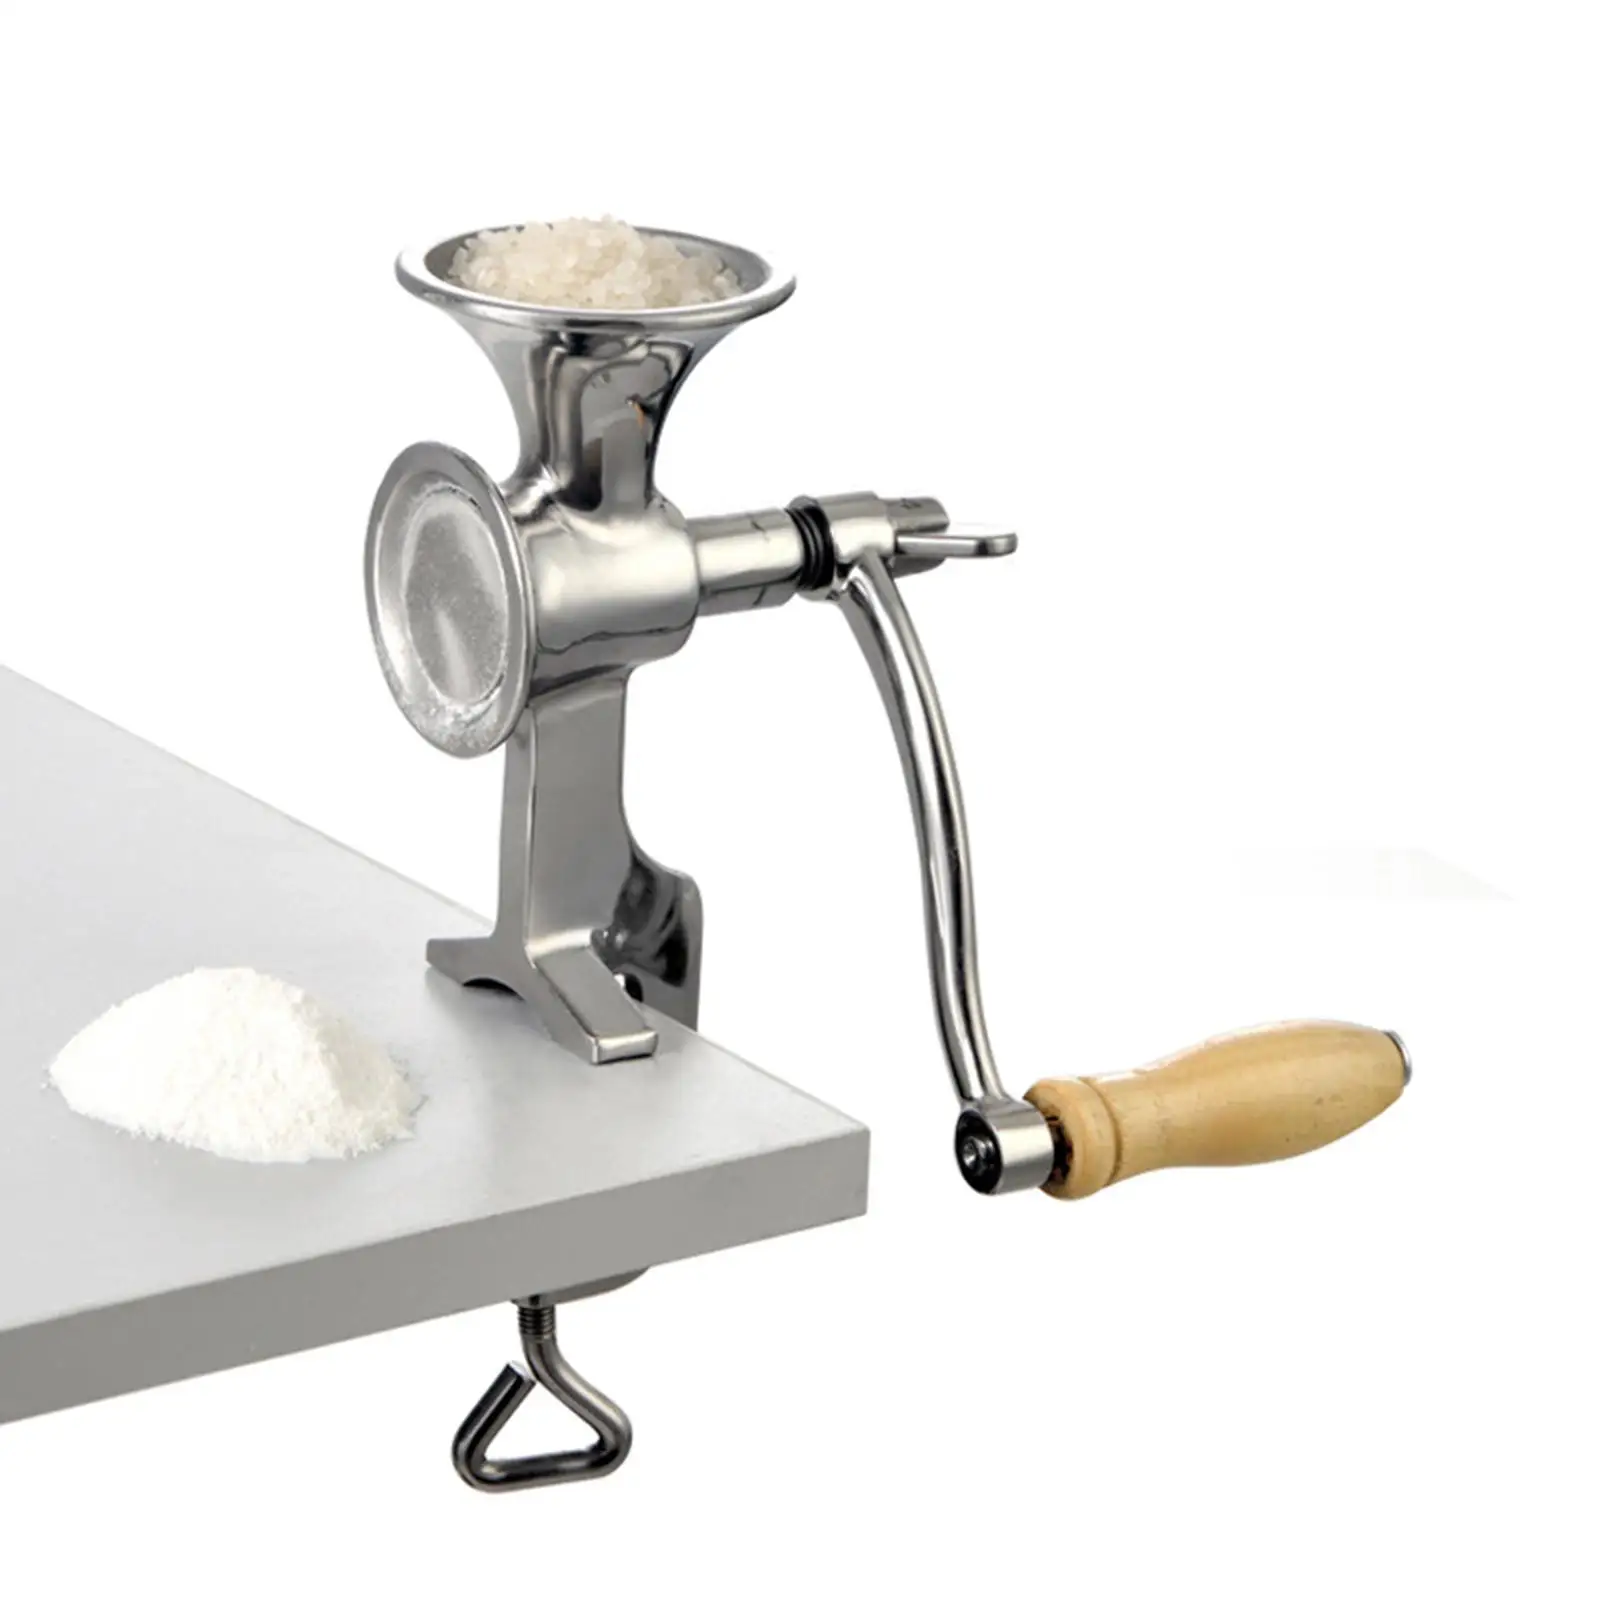 Hand Crank Grain Mill Stainless Steel Manual Grain Grinder for Seed Wheat Beans Grinding Nut Corn Home Kitchen Commercial Use